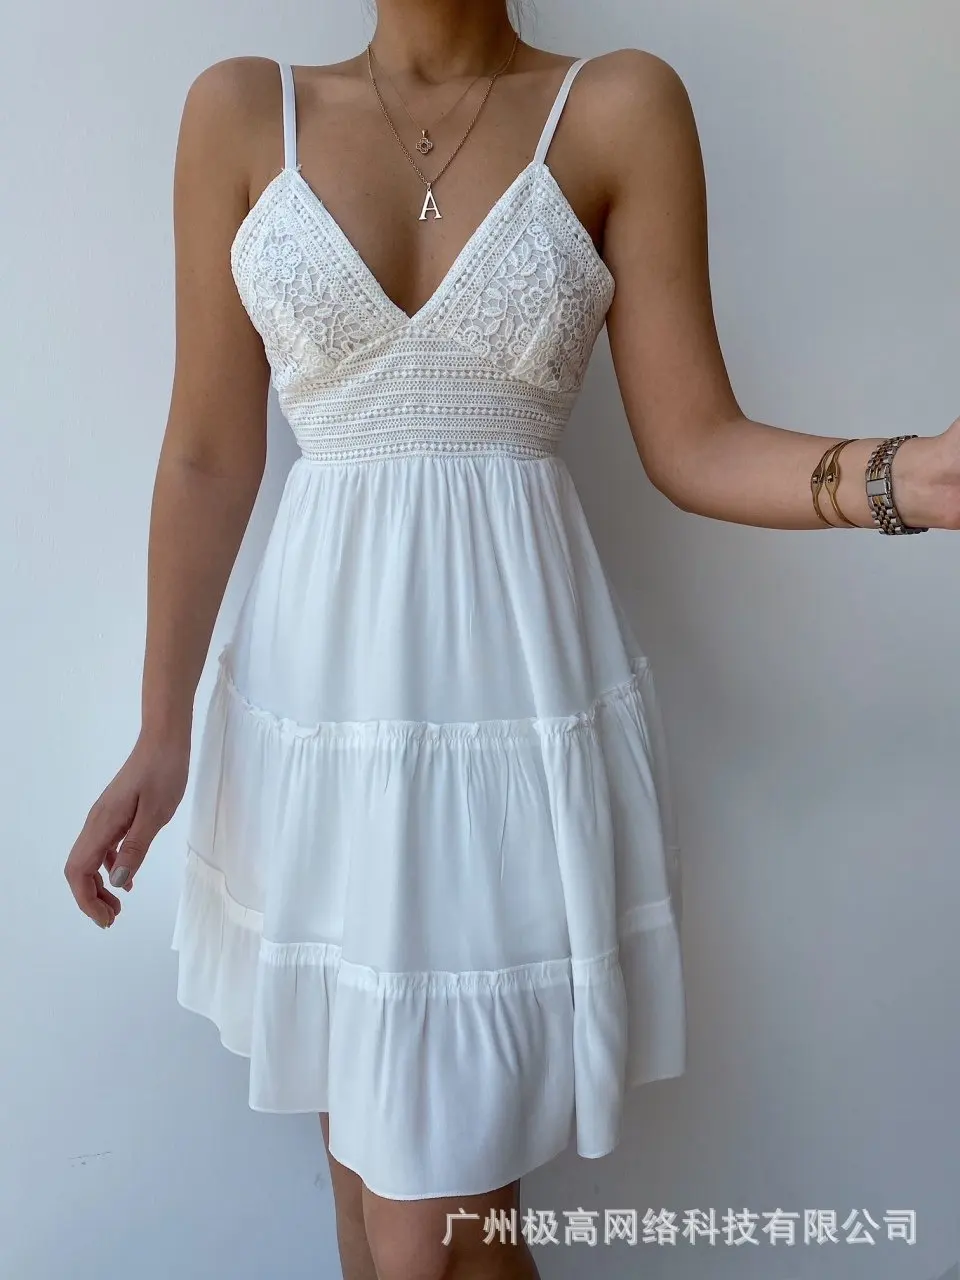 

Women Sleeveless Strap V Neck Knee Length Dress Crochet Lace Tied Detail Backless Cami Dress Summer Spring Party Club